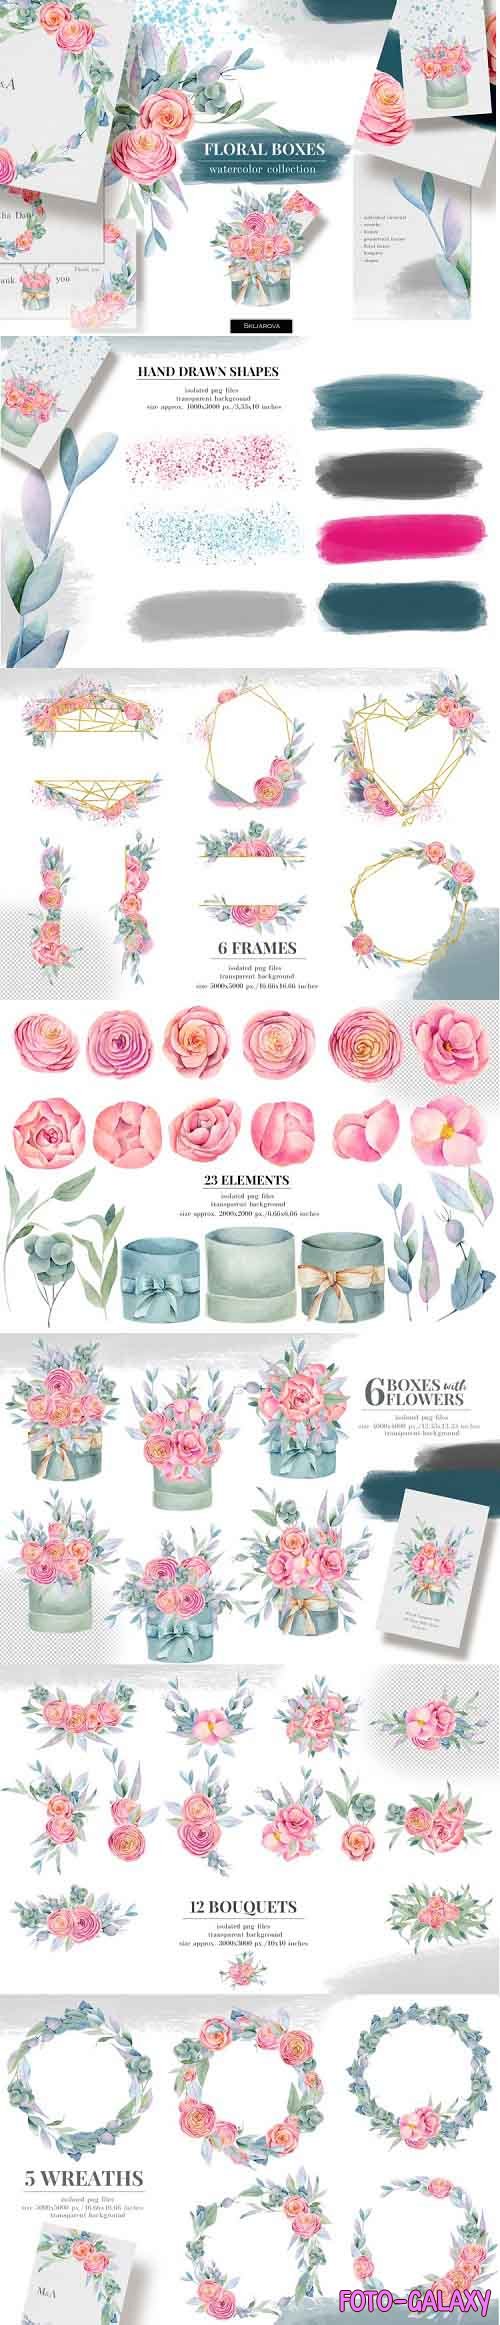 Floral boxes. Watercolor collection - 429165